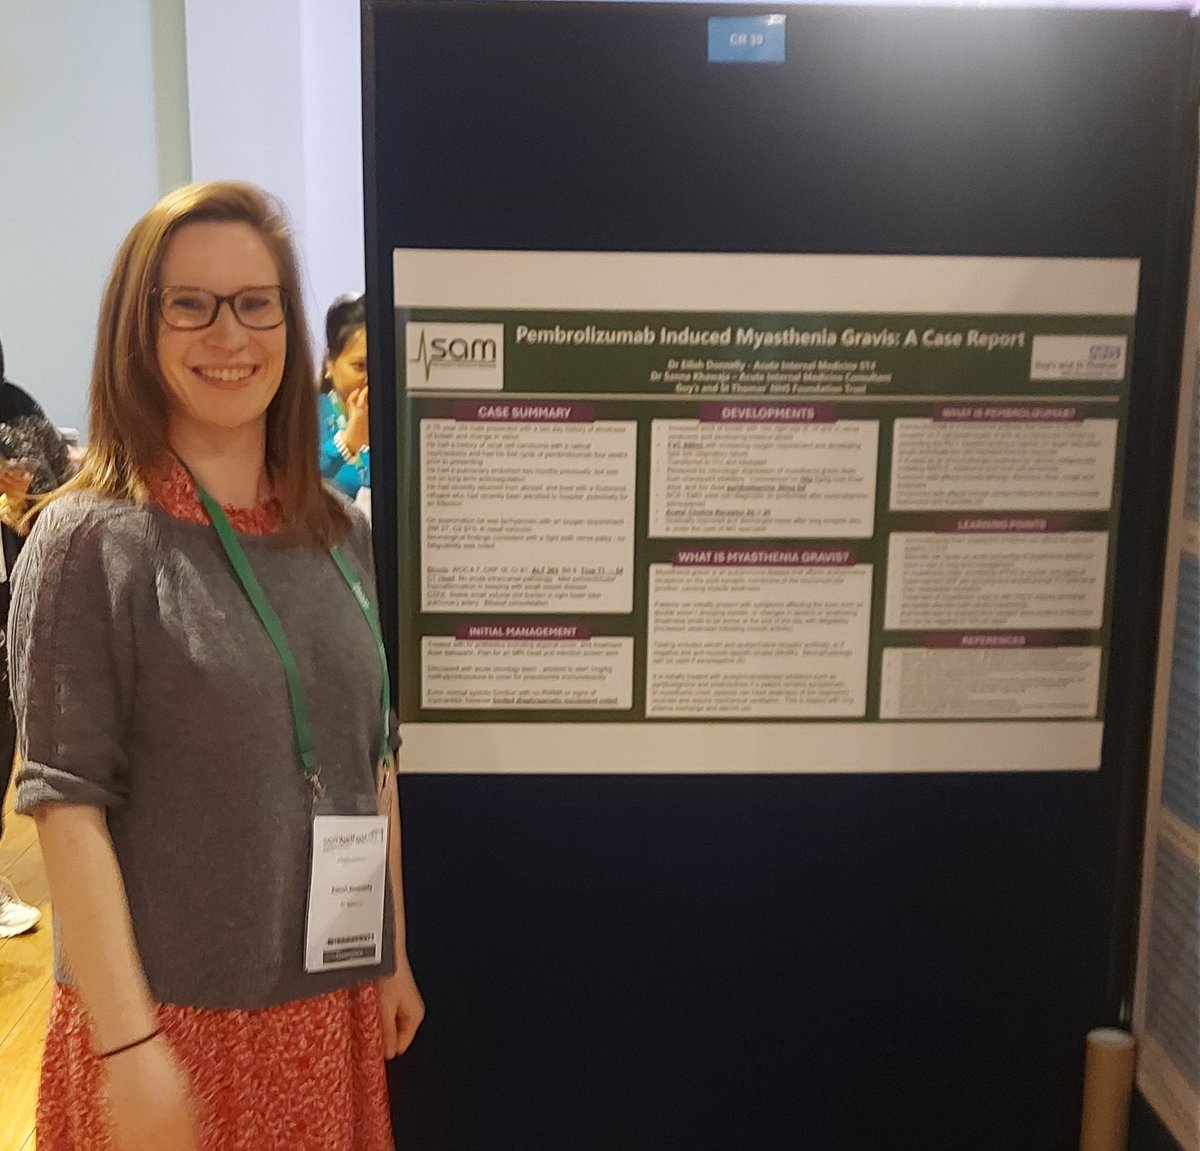 #sambelfast #takeaim
Really great Day One at SAMBelfast. Fantastic talks on POCUS and cardiology. Representing GSTT with my case report as a poster and in the lightning round. 
Bring on Day Two!